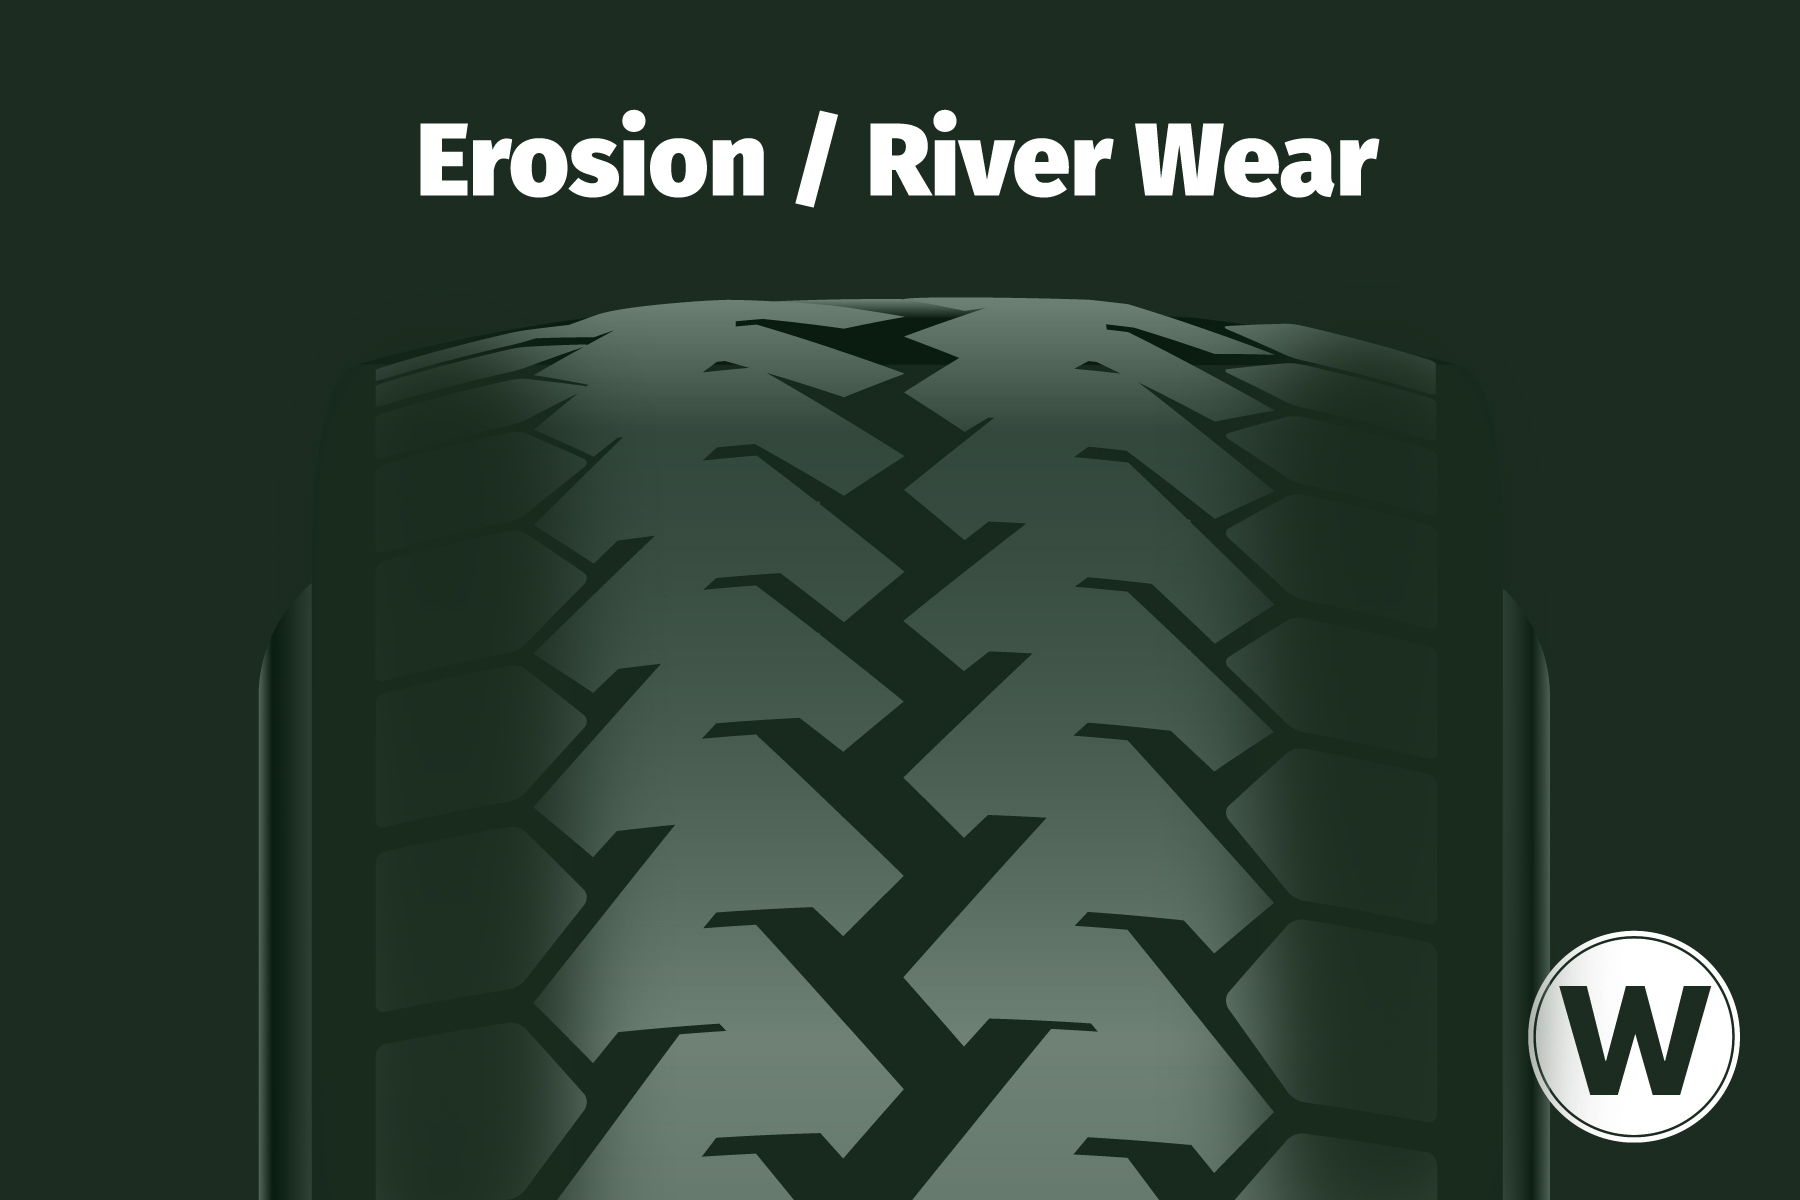 A wear pattern diagram that shows where to find erosion/river wear on your commercial steer tires.